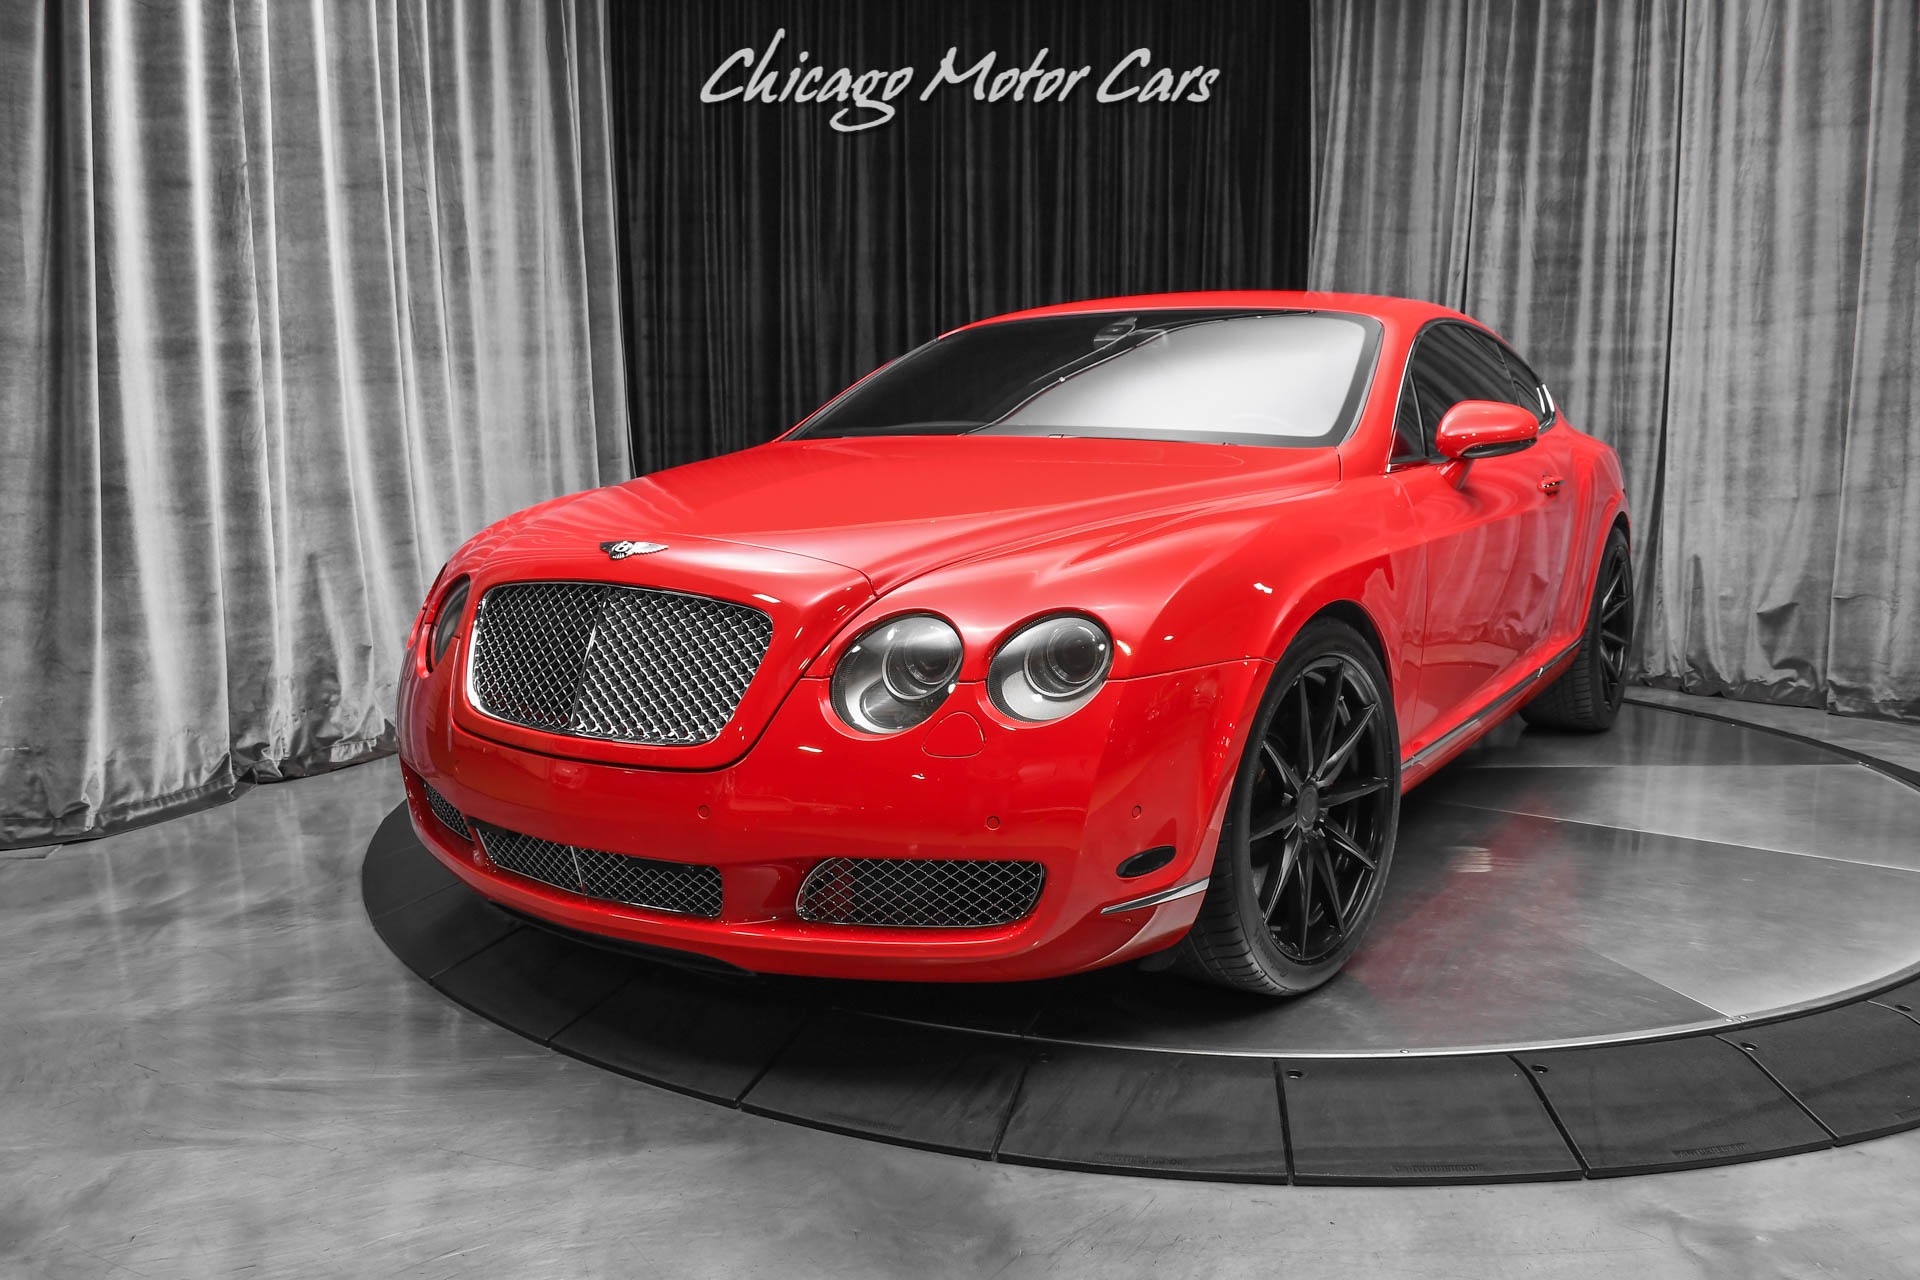 Used-2005-Bentley-Continental-GT-Mulliner-Pkg-W12-AWD-Coupe-Fully-Serviced-ECU-Tune